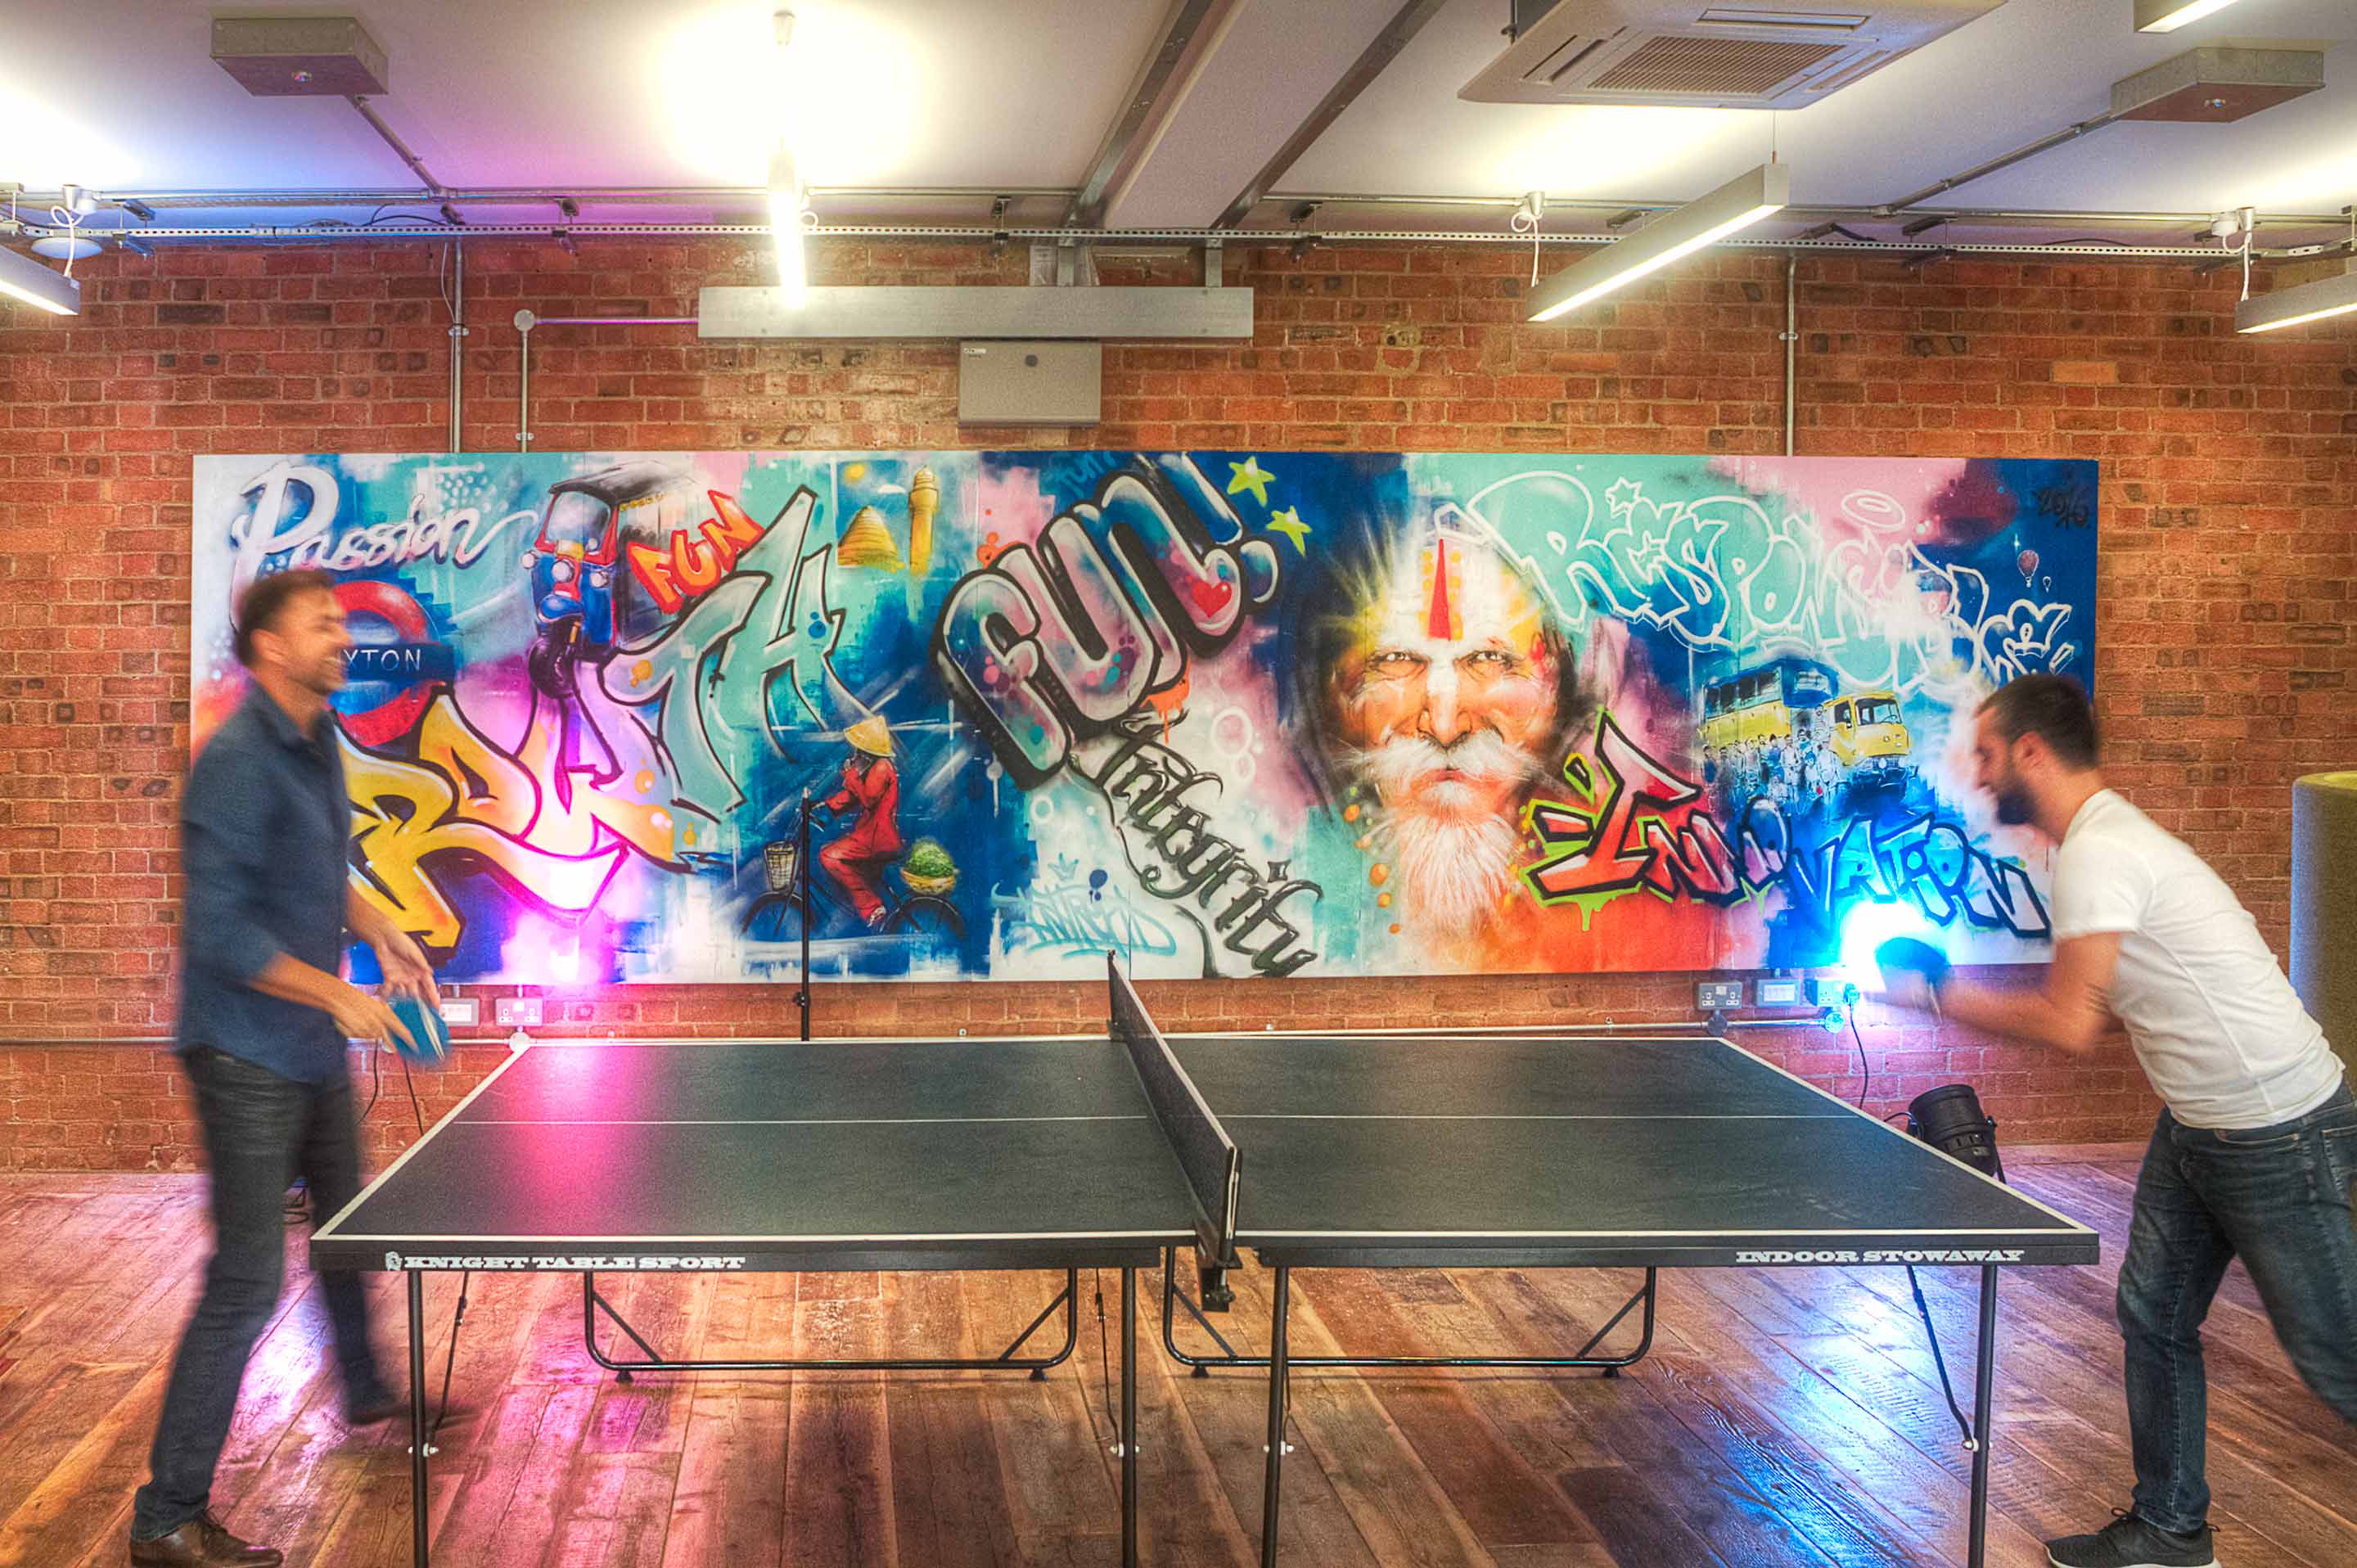 Ping pong table for Intrepid Travel's social space